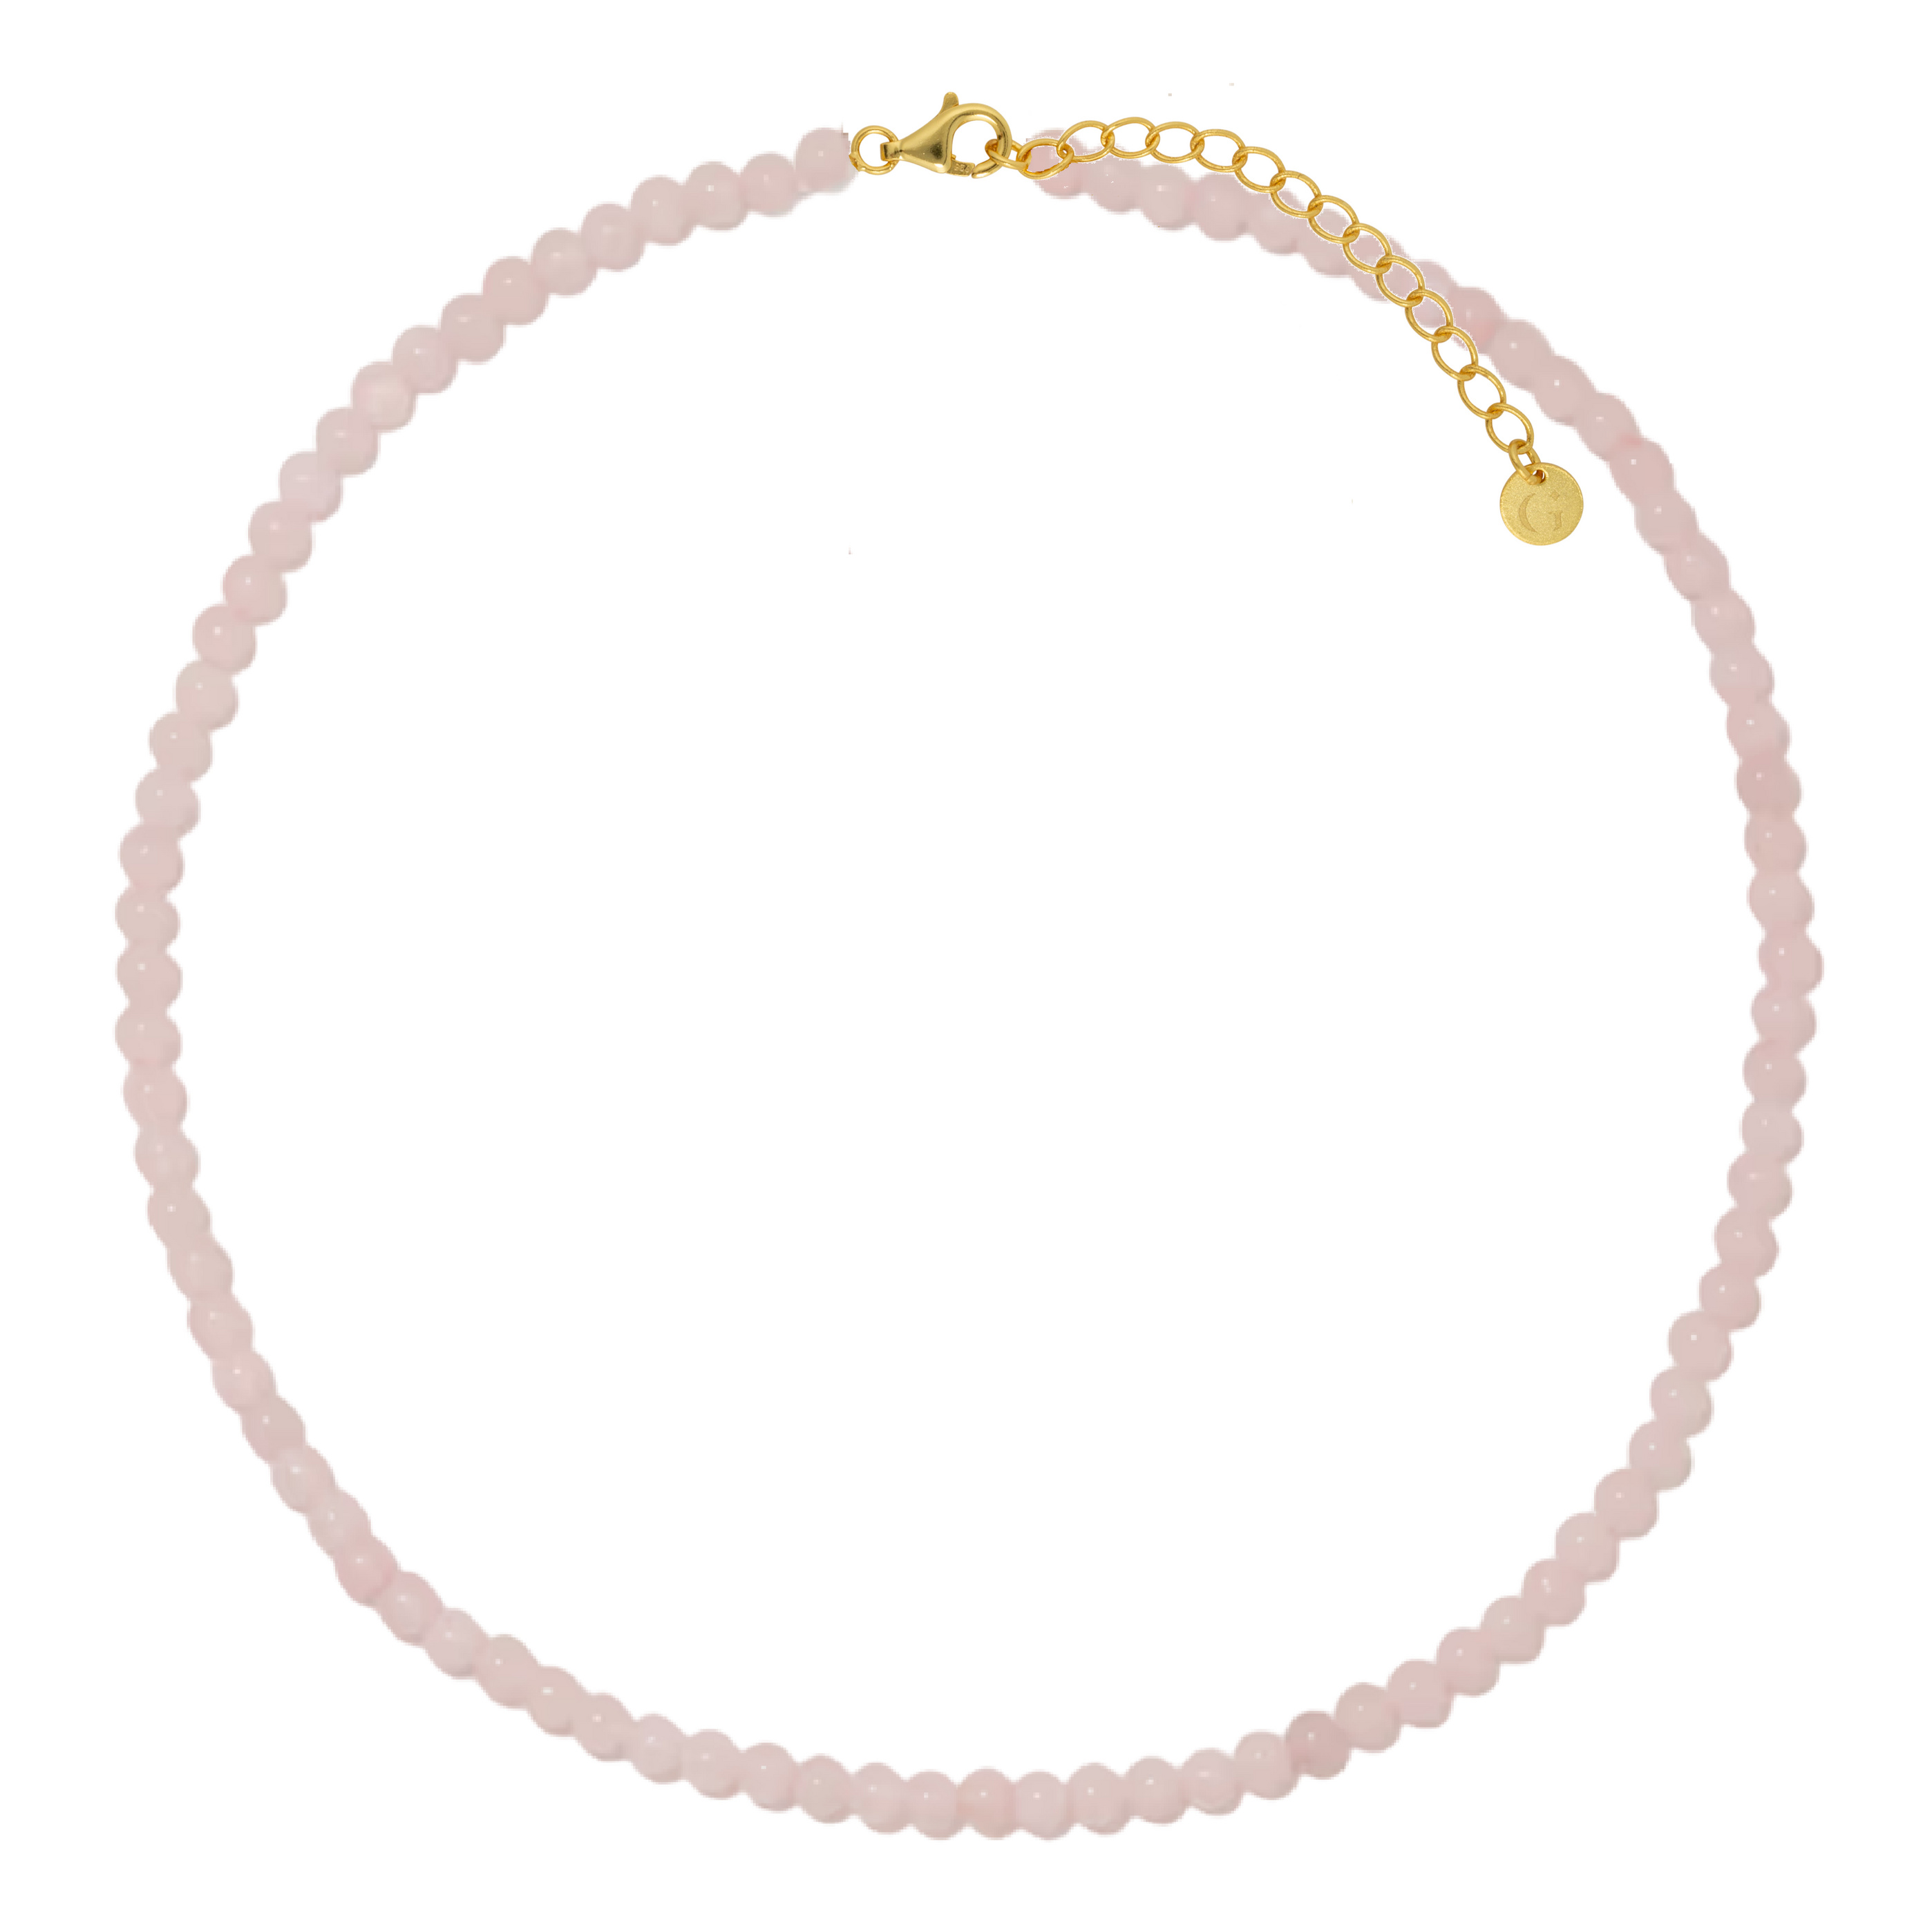 Women’s Gold / Pink / Purple Rose Quartz Beaded Necklace In Gold Gold Trip